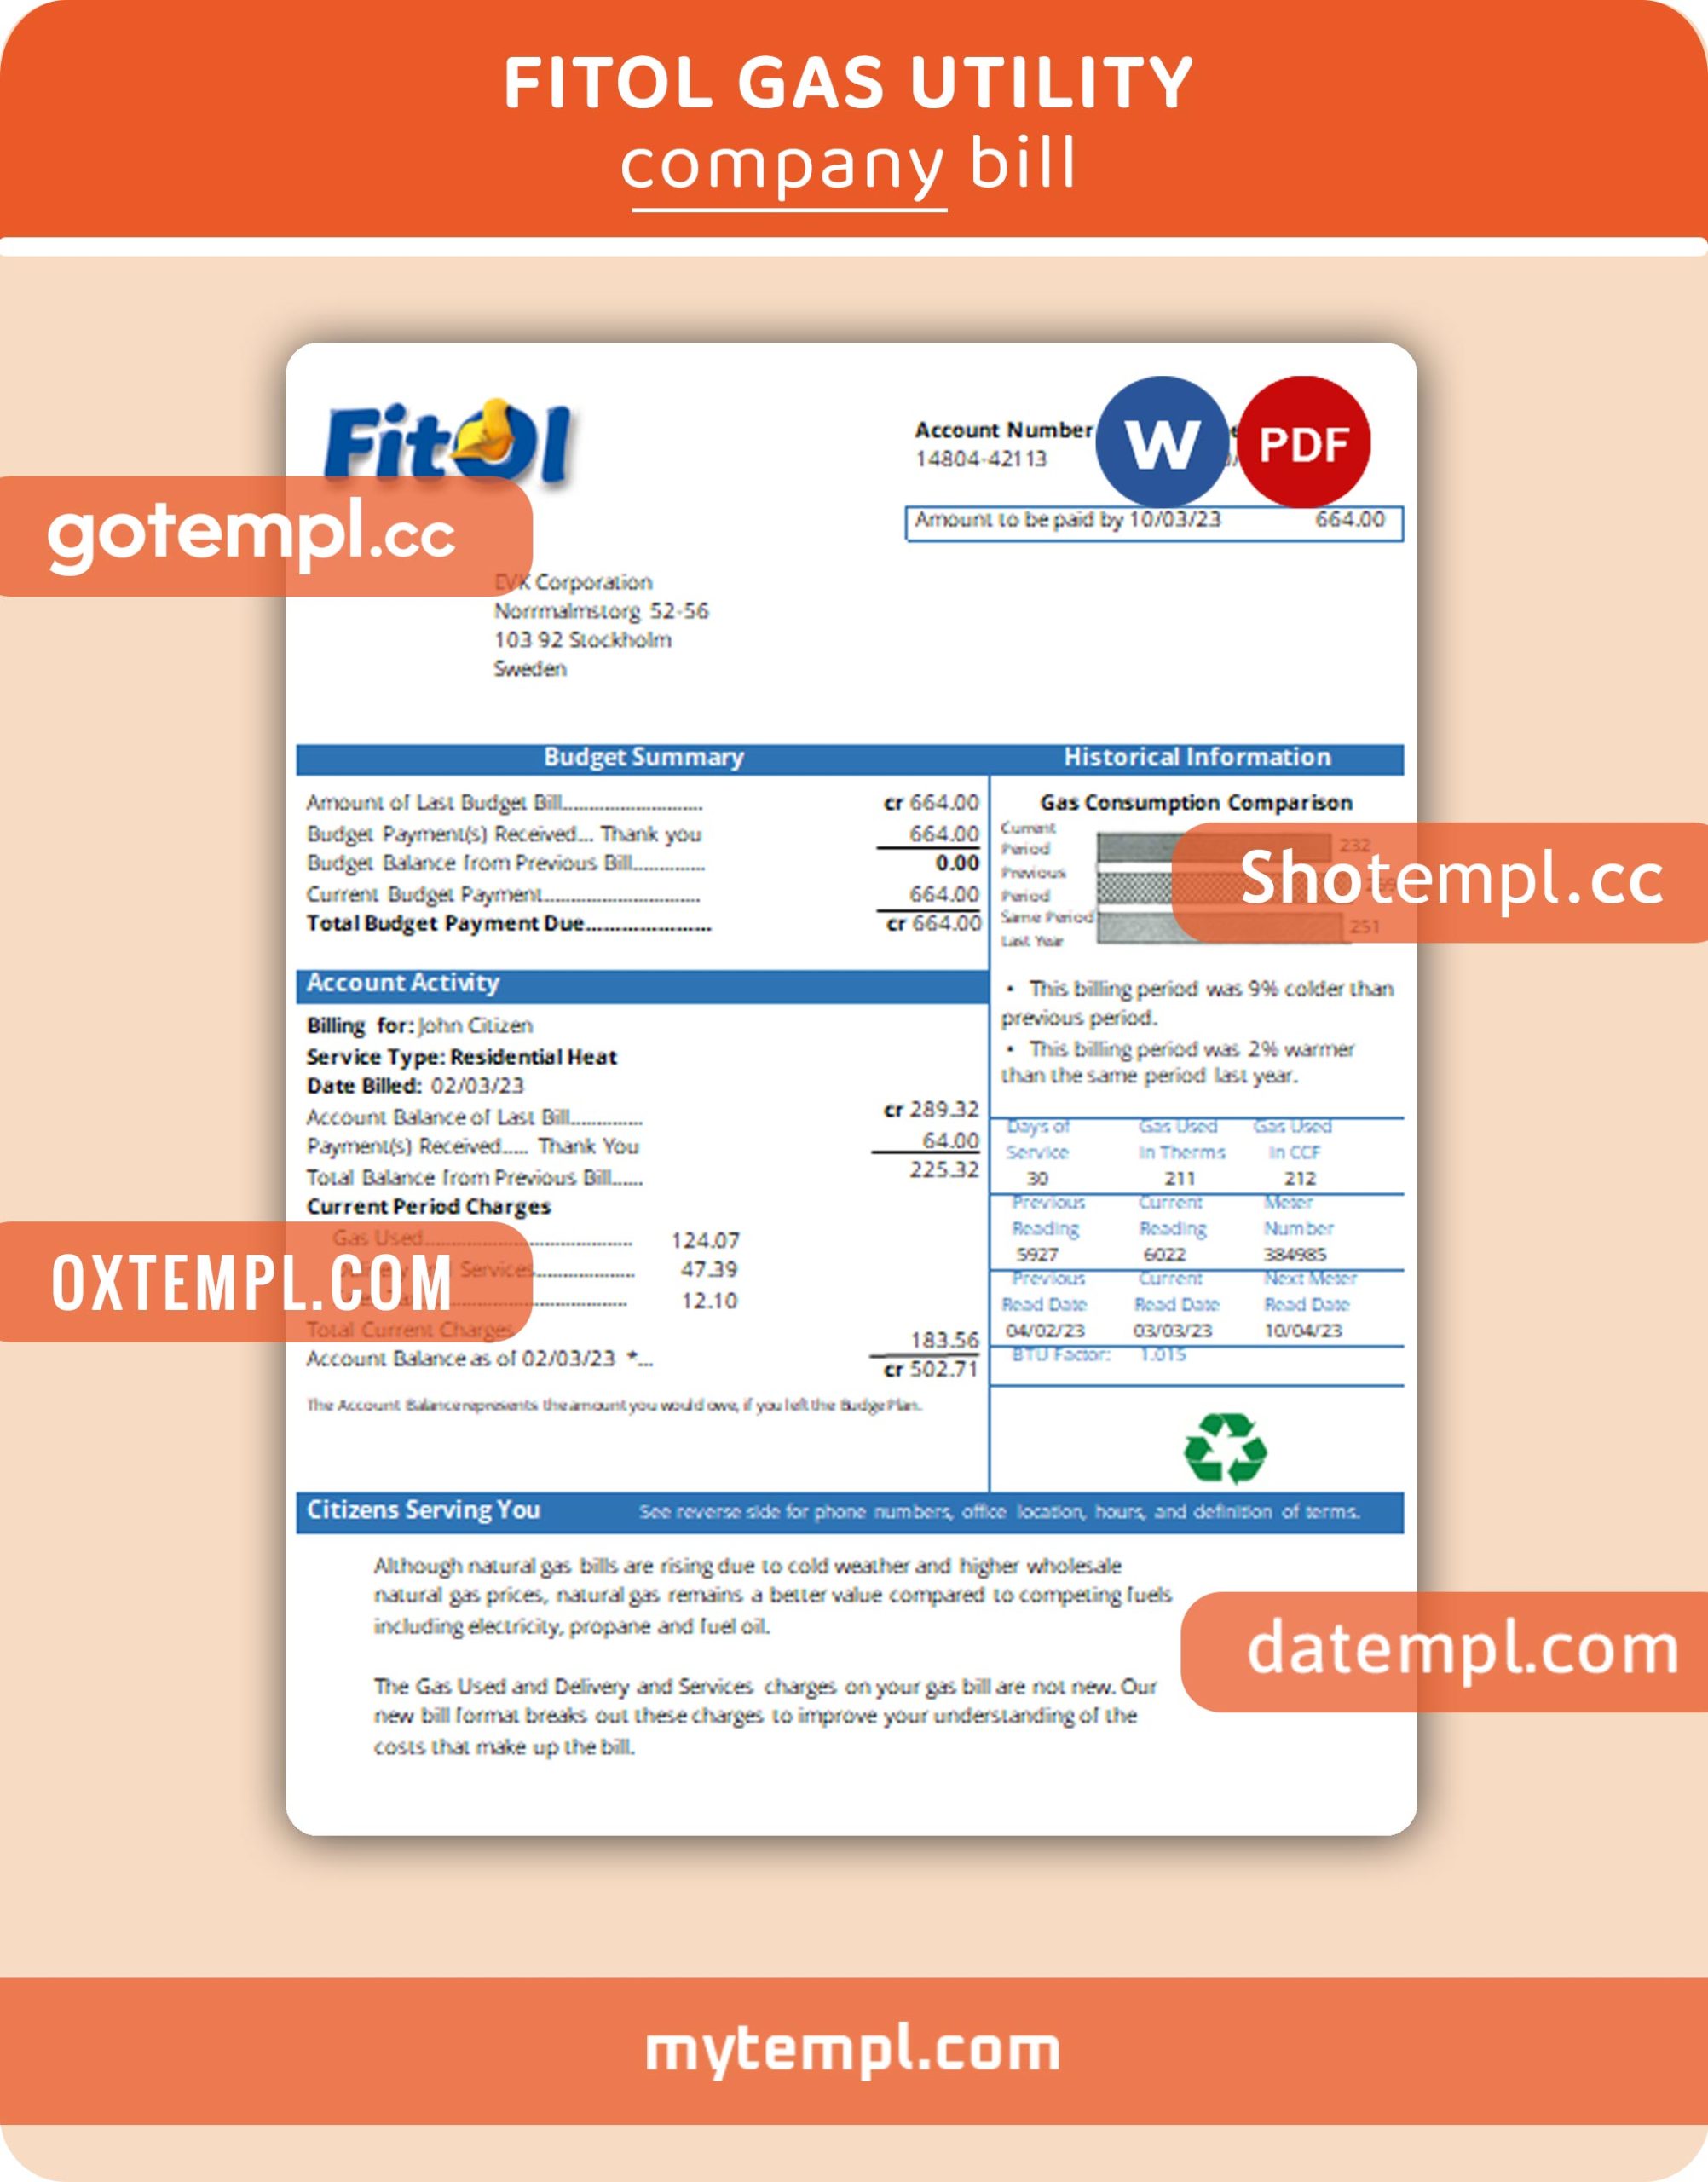 Fitol gas business utility bill, Word and PDF template